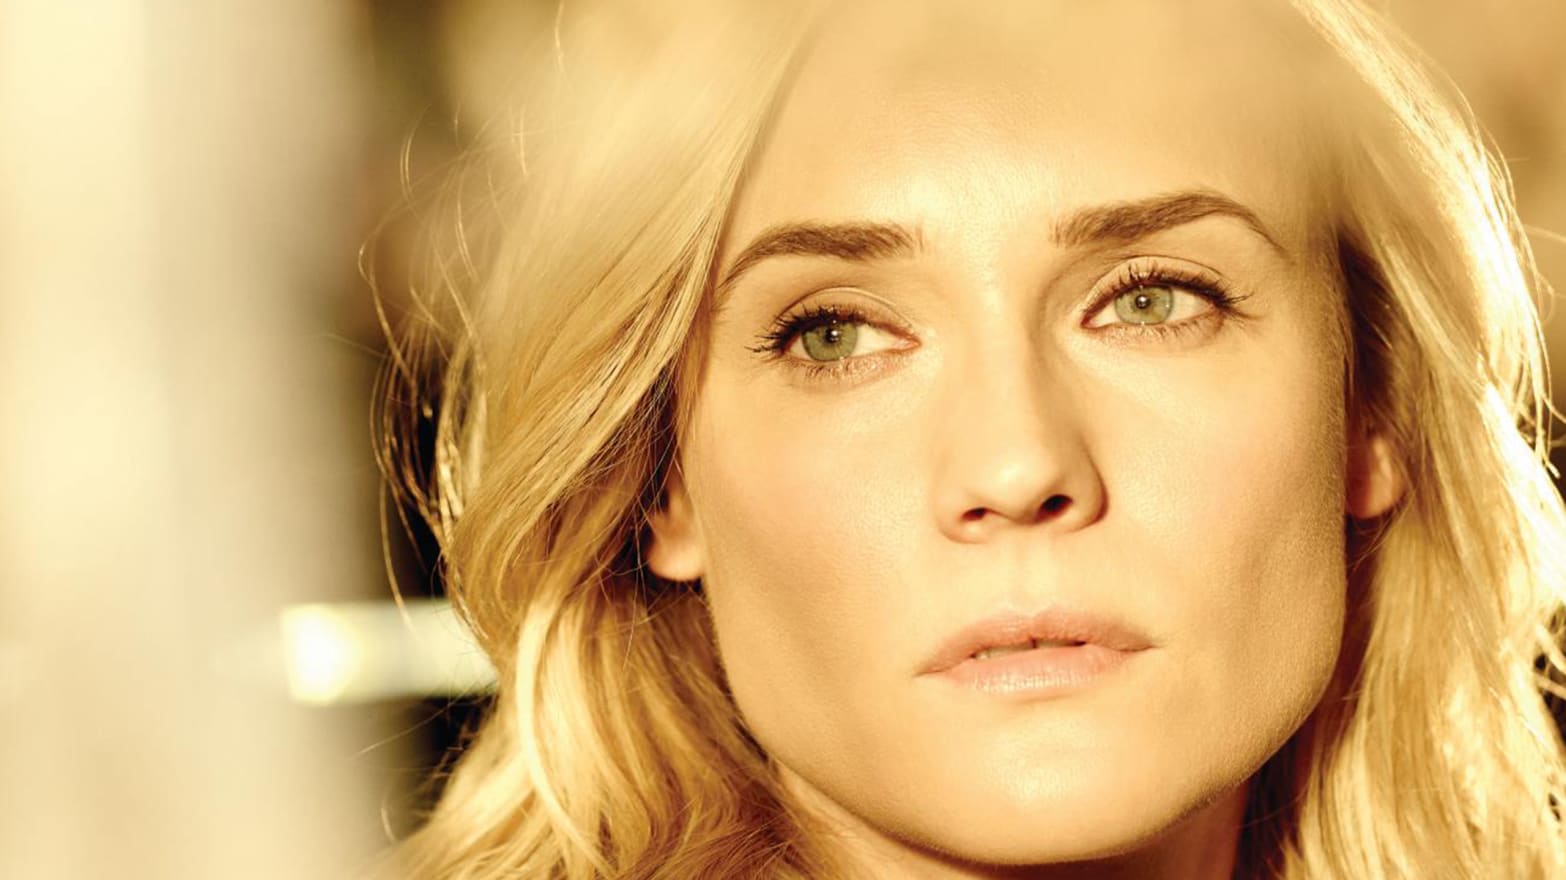 Diane Kruger on The Bridge, the Immigration Problem, and Rooting For Germany in the World image